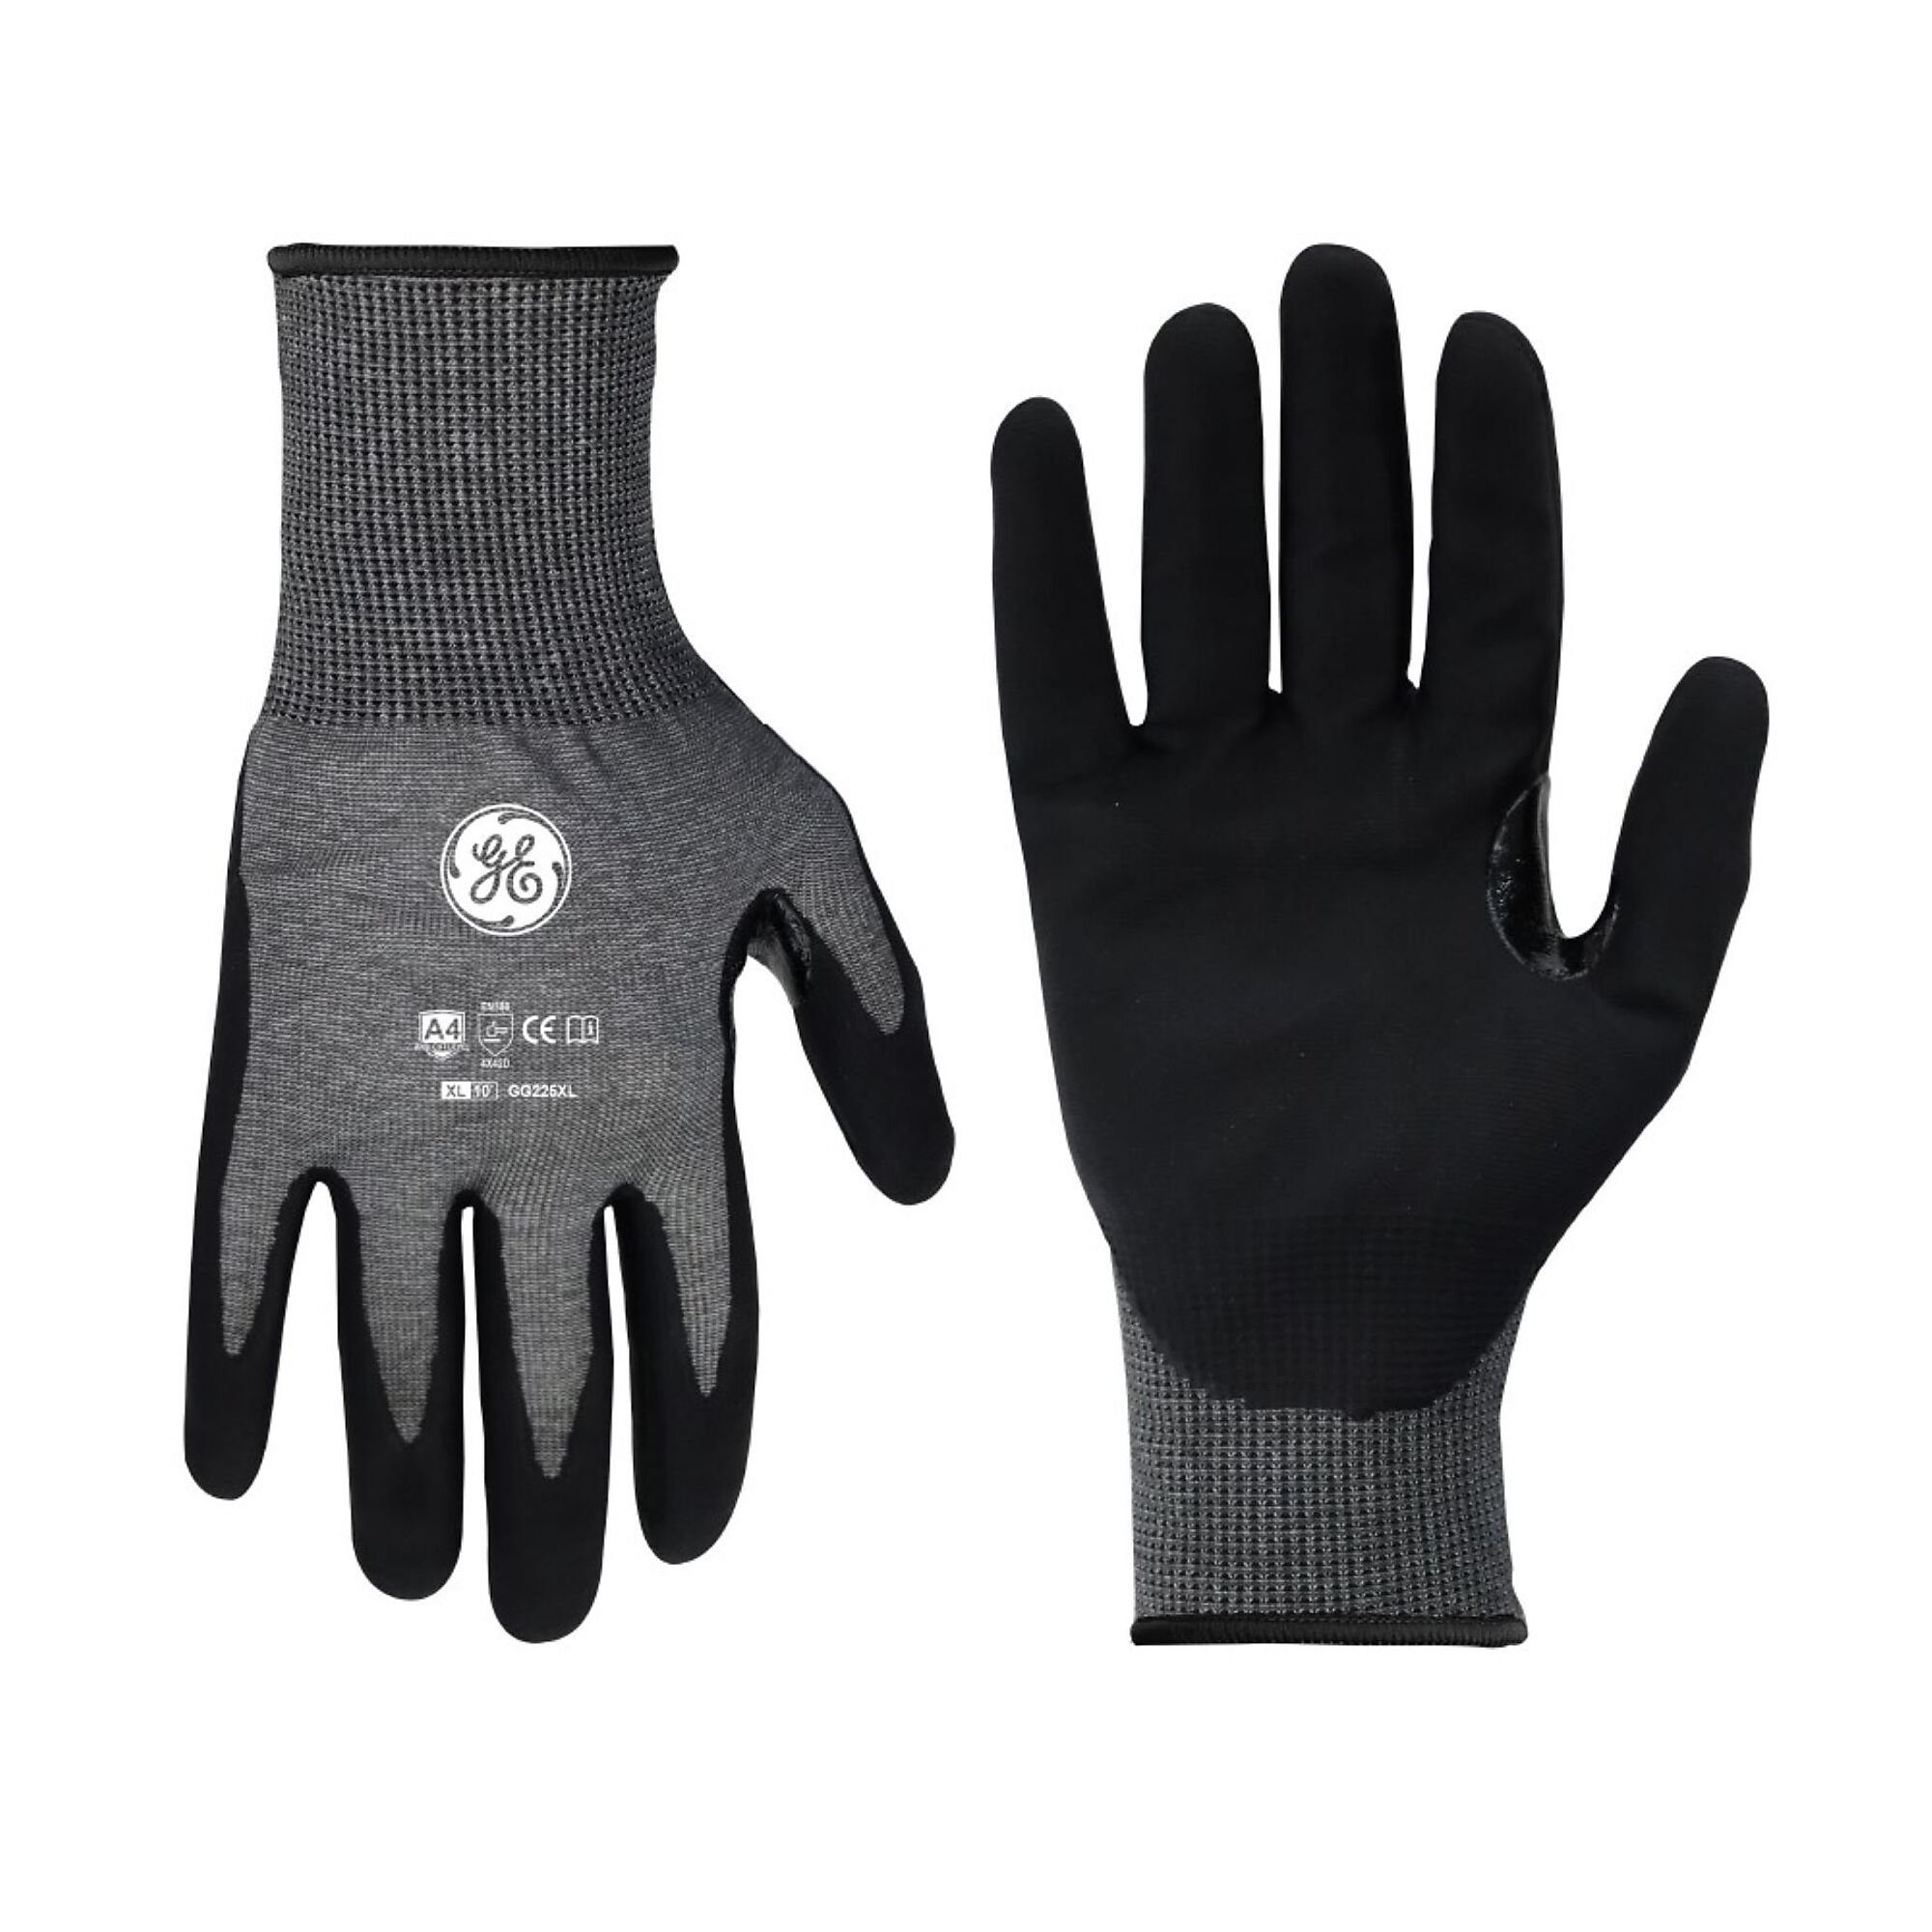 General Electric, Unisex Dipped Gloves Black/Blue XL 12 pair, Size XL, Included (qty.) 12, Model GG225XL